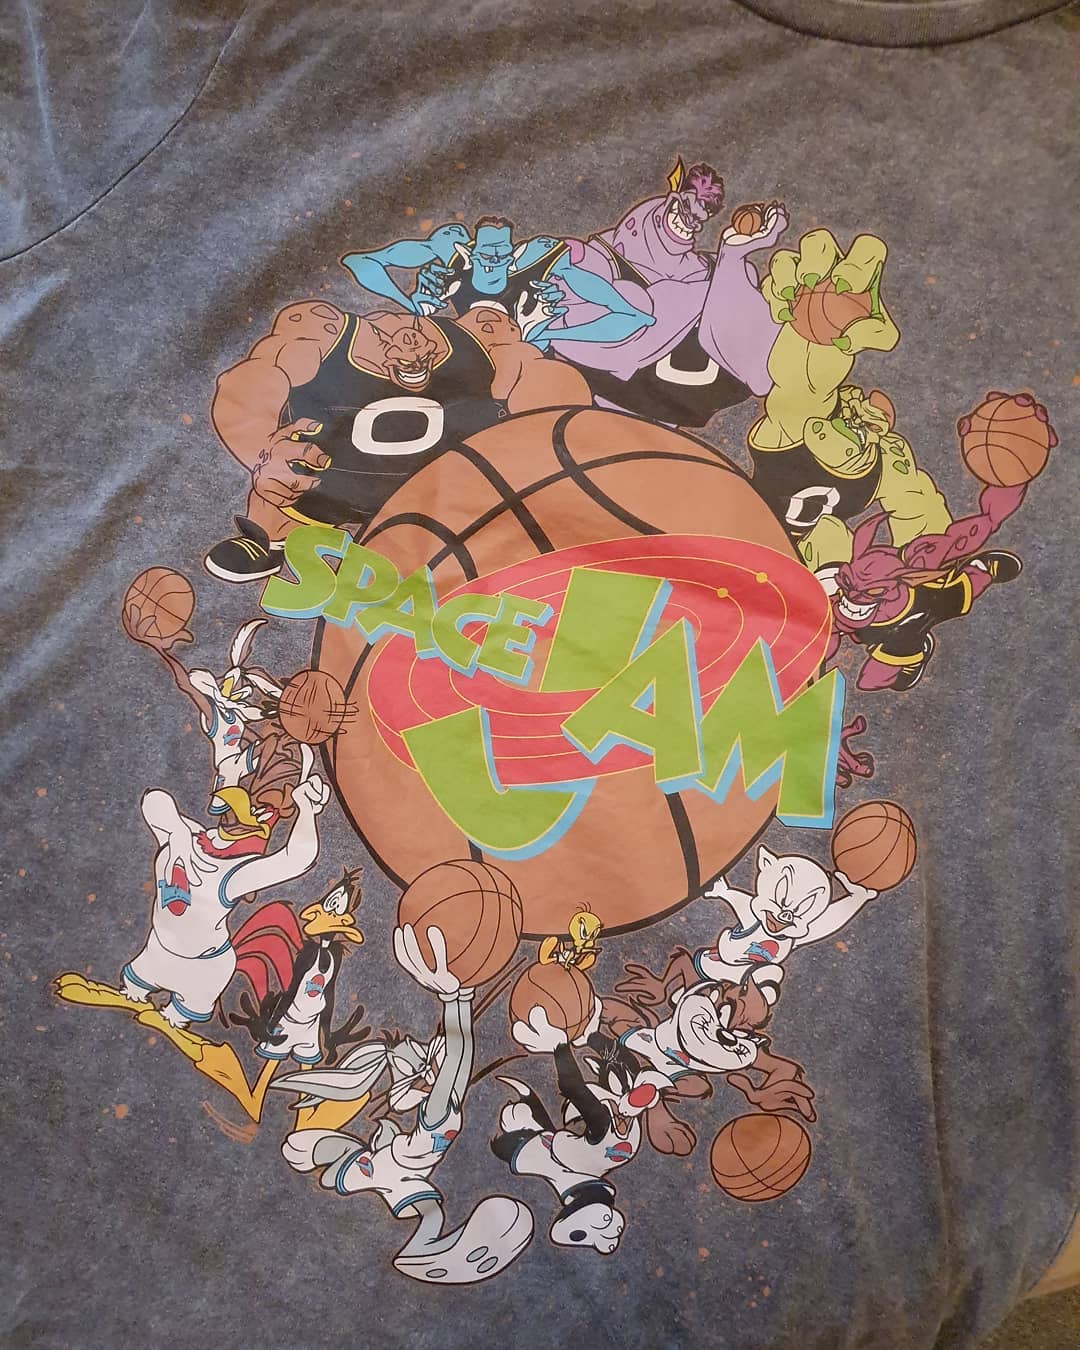 Everybody get up, it’s time to slam now
We got a real jam goin‘ down
Welcome to the Space Jam
Here’s your chance, do your dance at the Space Jam
Alright… #spacejam 
#tshirt